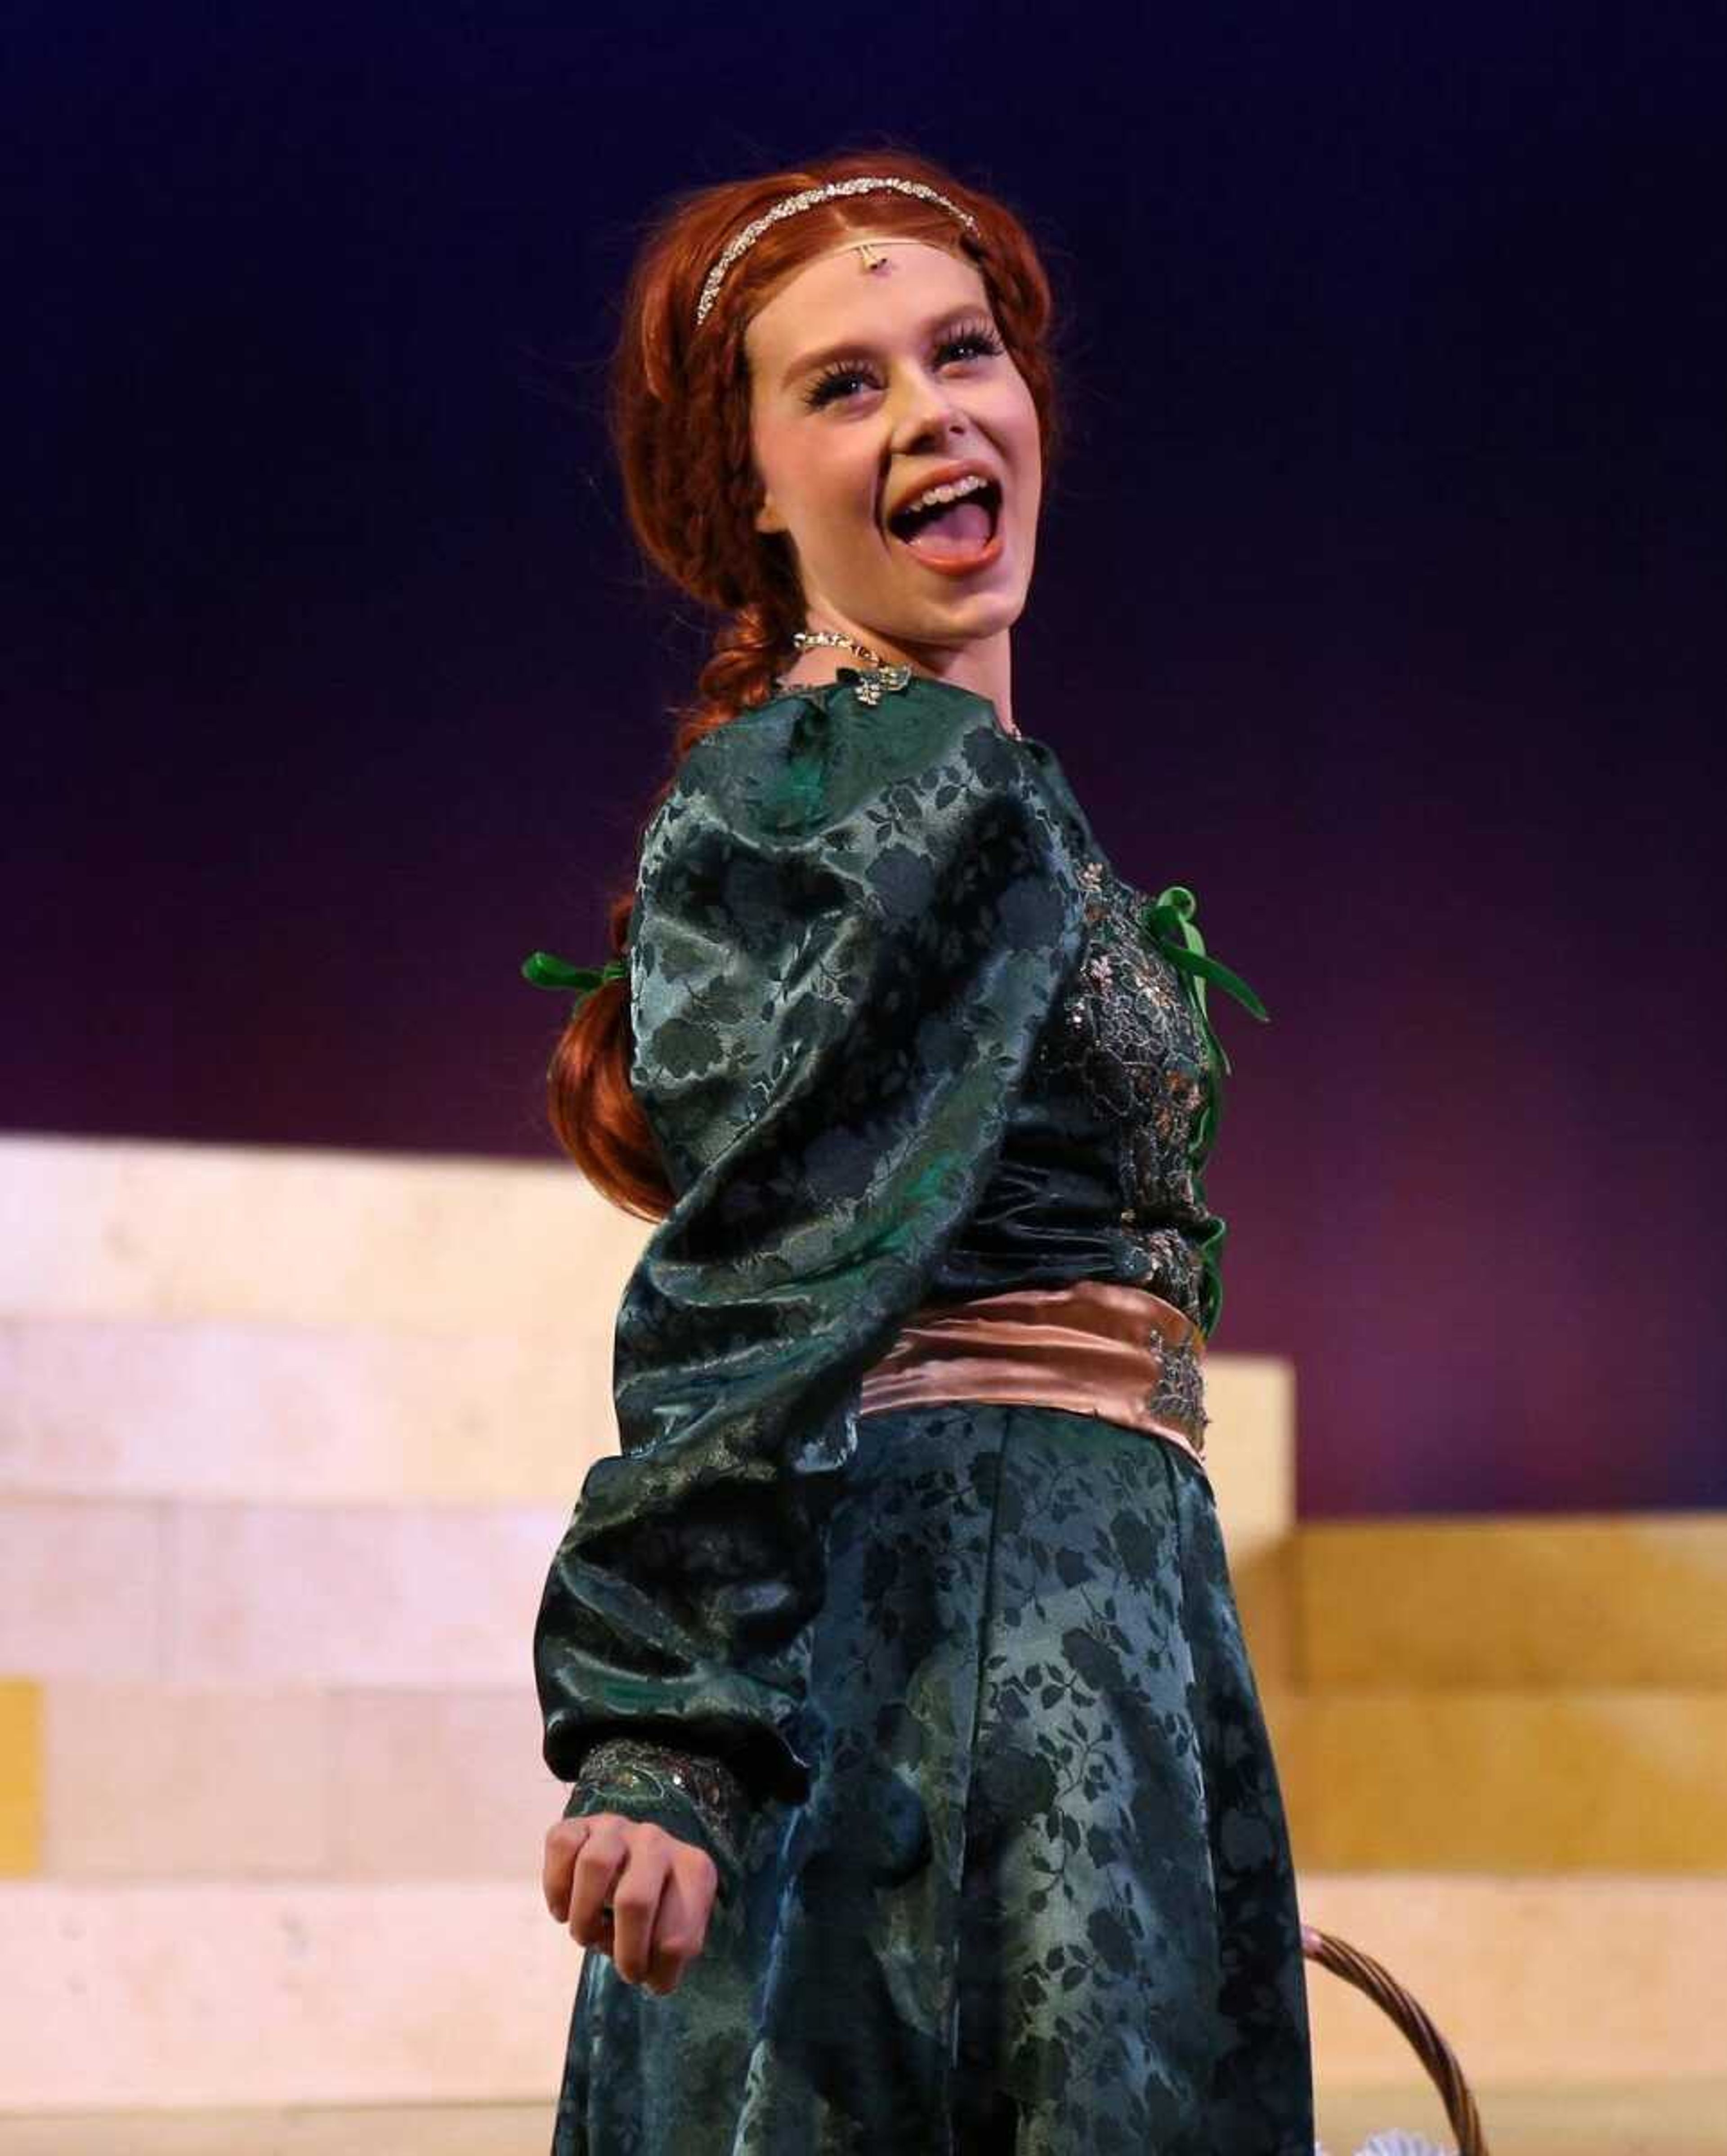 Josslyn Shaw plays the role of Princess Fiona in “Shrek the Musical” during her junior year at Southeast. 

“This photo was taken in the middle of Act II which was a tap number. It was one of the most challenging numbers to do because I had to do an entire tap number and immediately then belt out with no air in my lungs” Shaw said.

